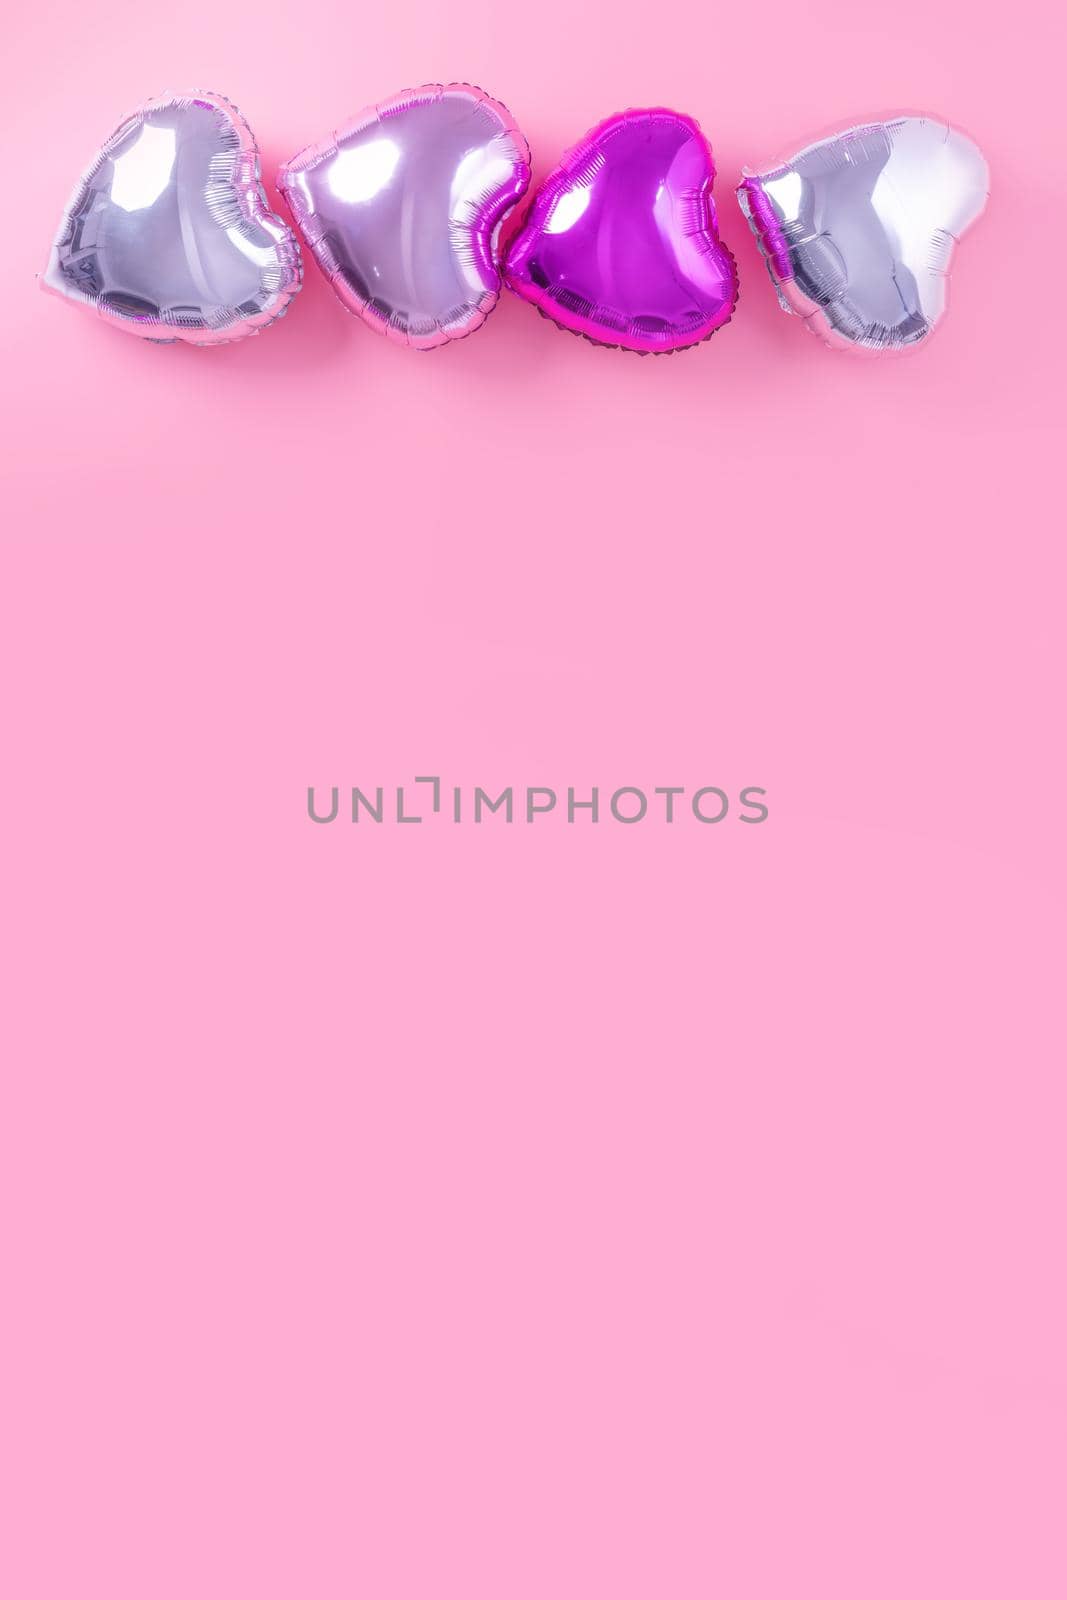 Valentine's Day romantic design concept - Beautiful real heart shape foil balloon isolated on pale pink background, top view, flat lay, overhead above photography.